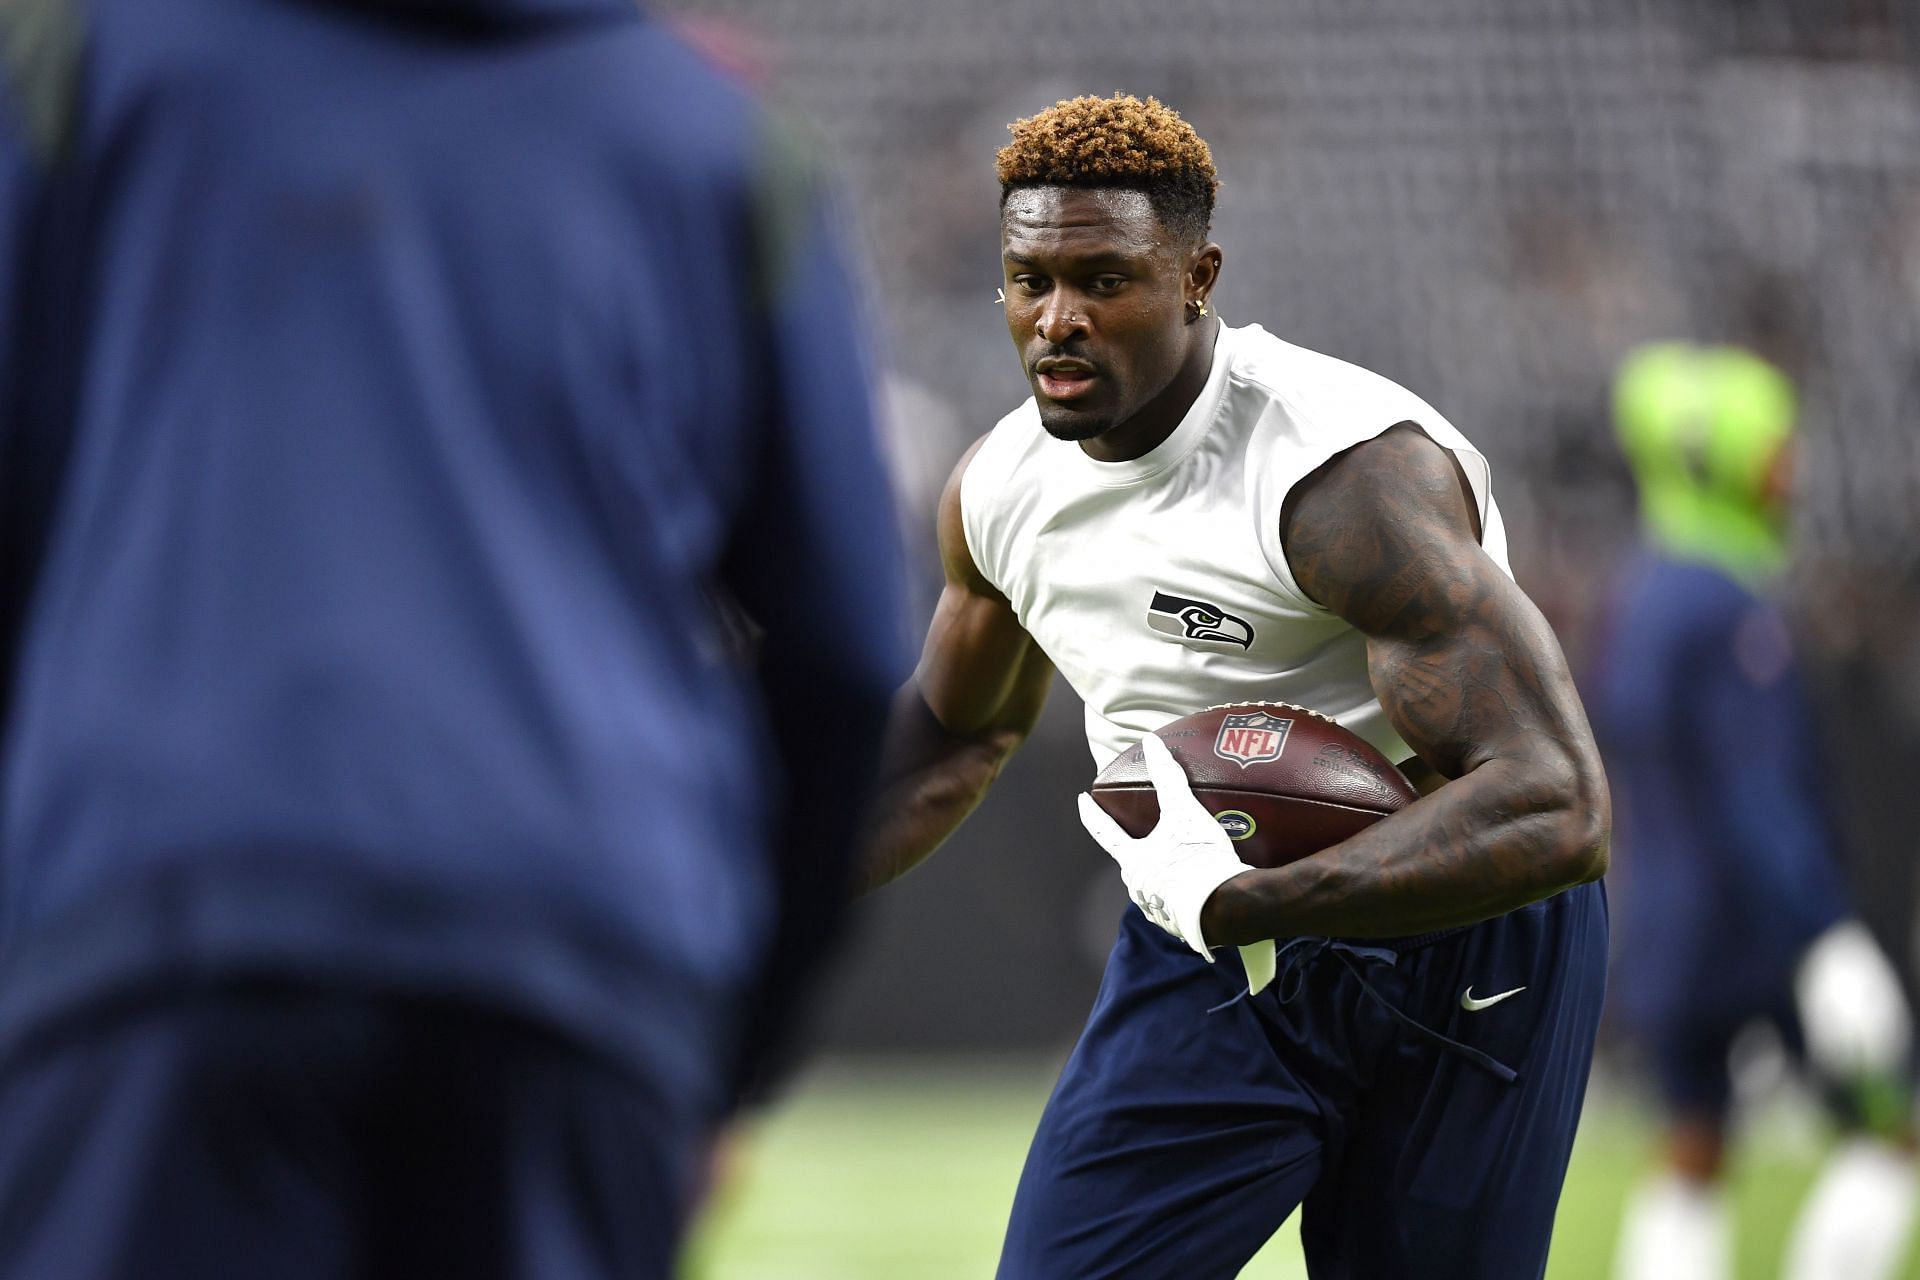 D.K. Metcalf's ridiculous diet includes several bags of candy a day